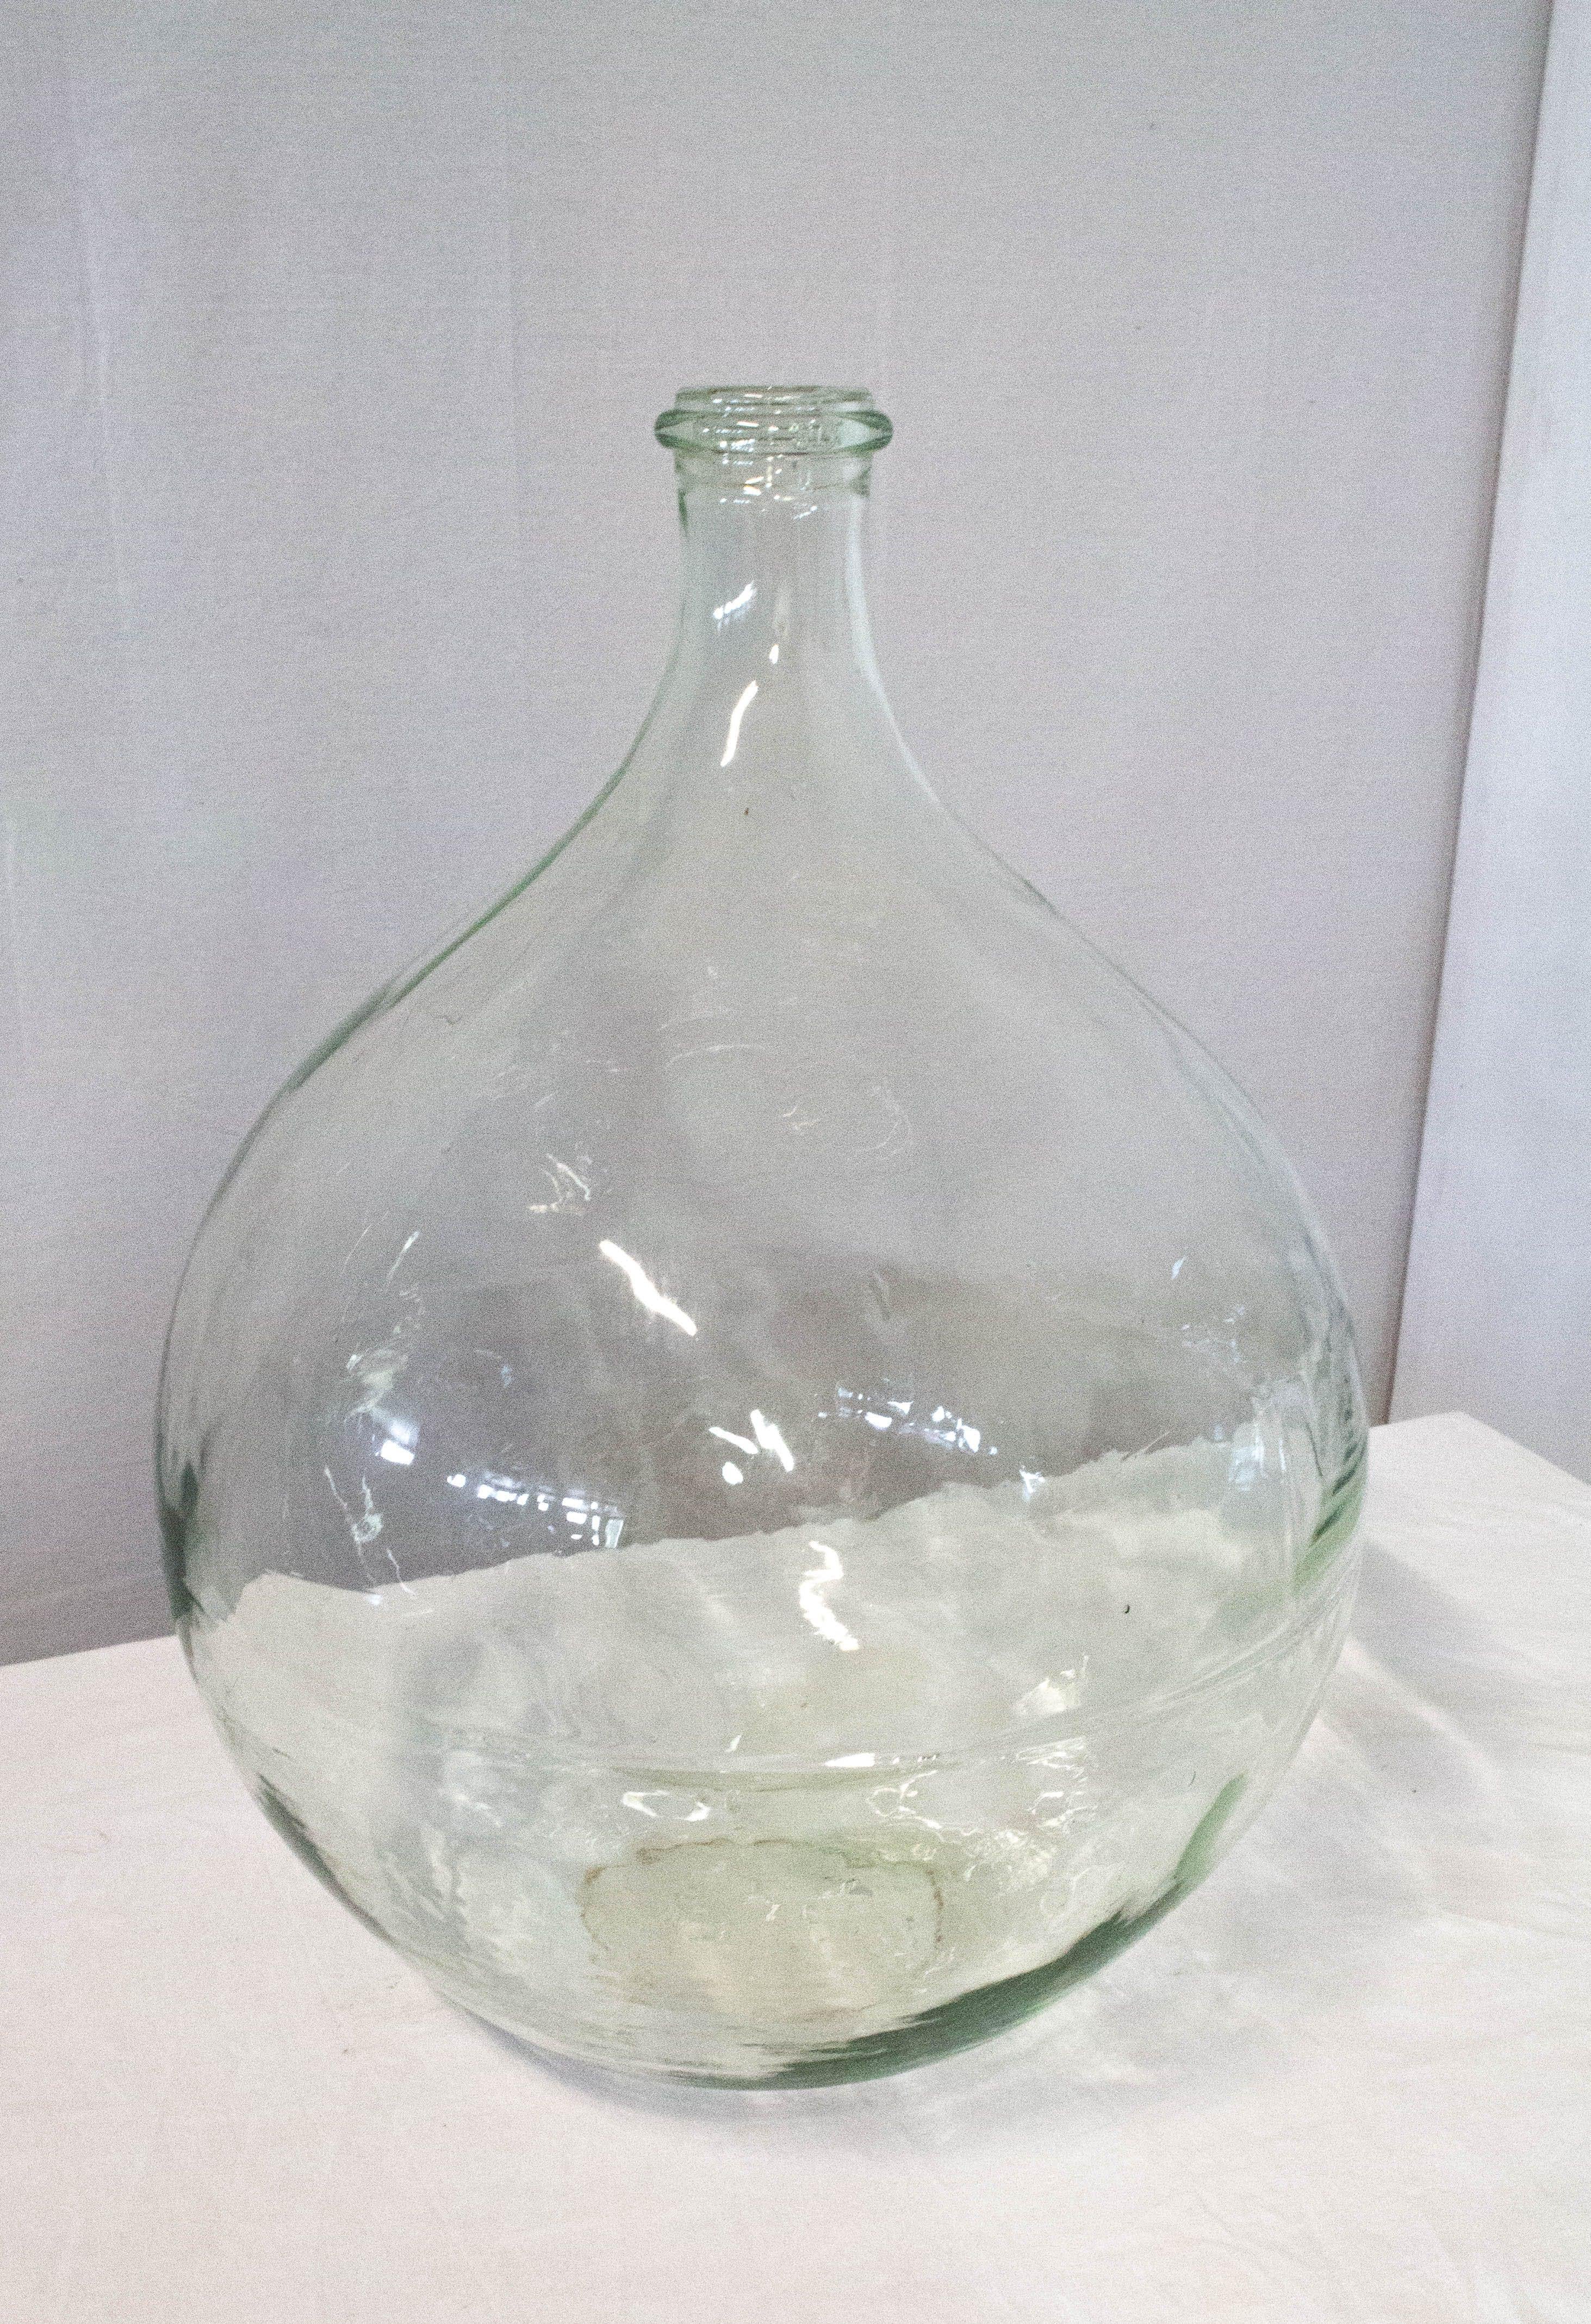 Dame Jeanne or carboy vintage glass bottle demijohn
Irregularities in the glass that give it all its charm
13 US gallon or 50L
Very good condition.